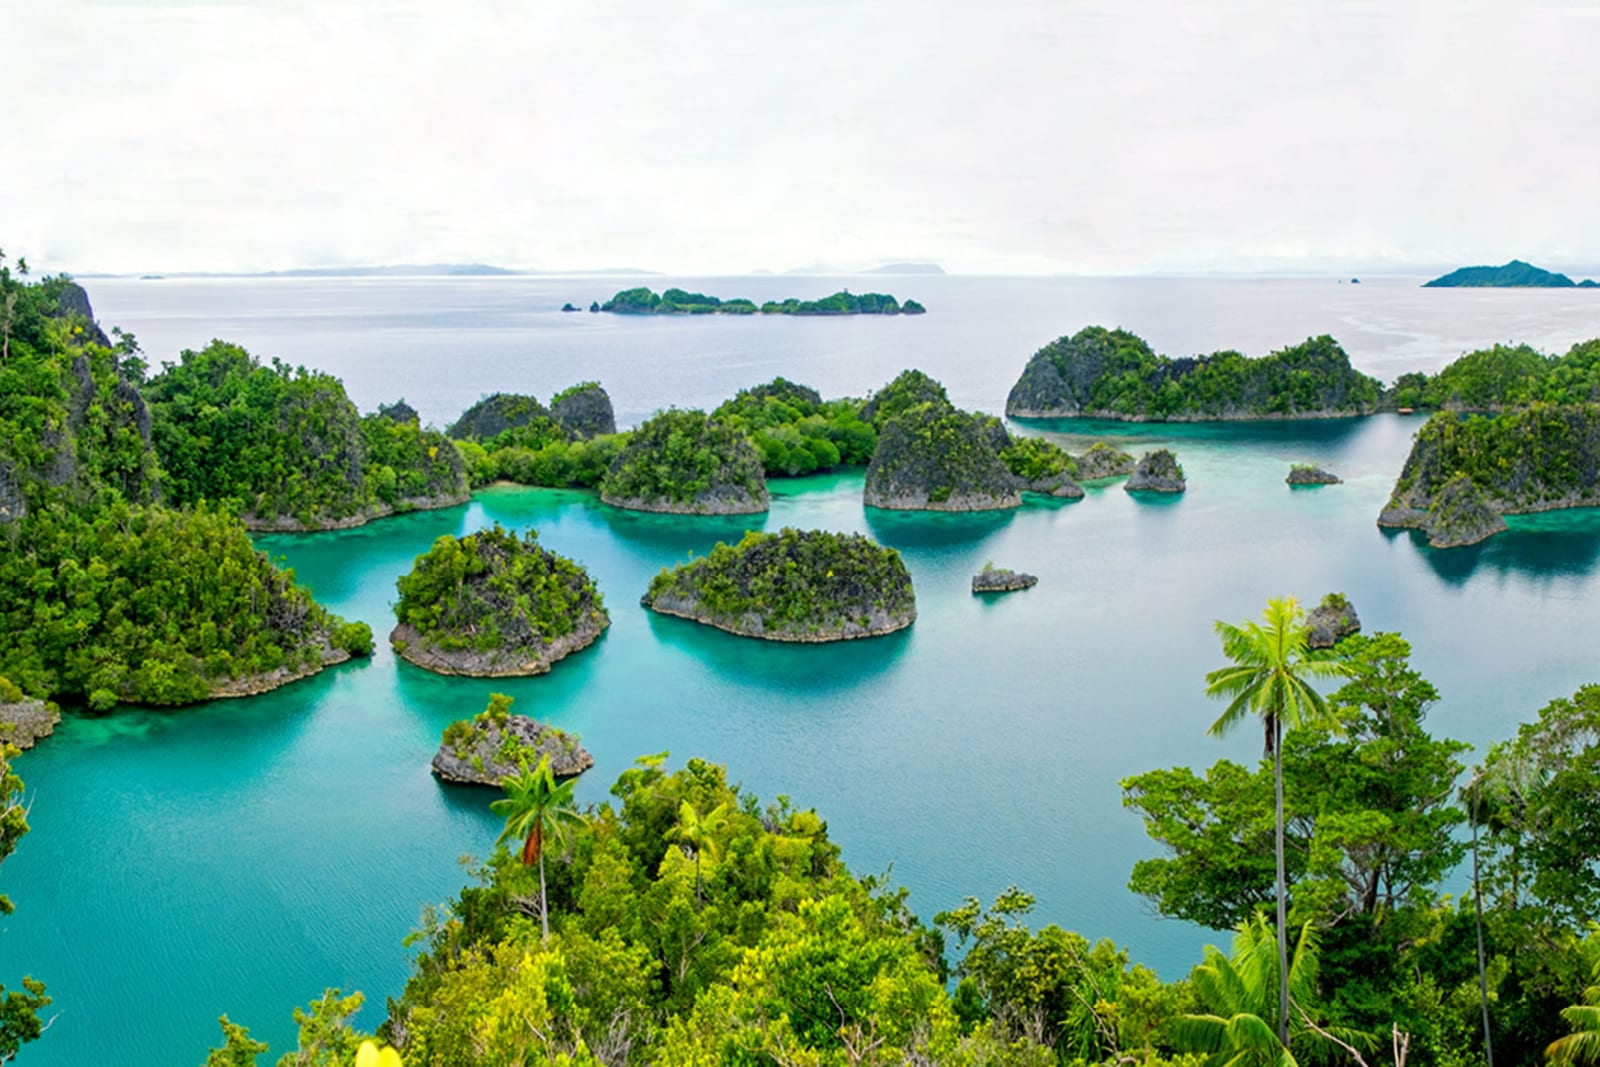 Raja Ampat is one of the world's top ecotourism destinations